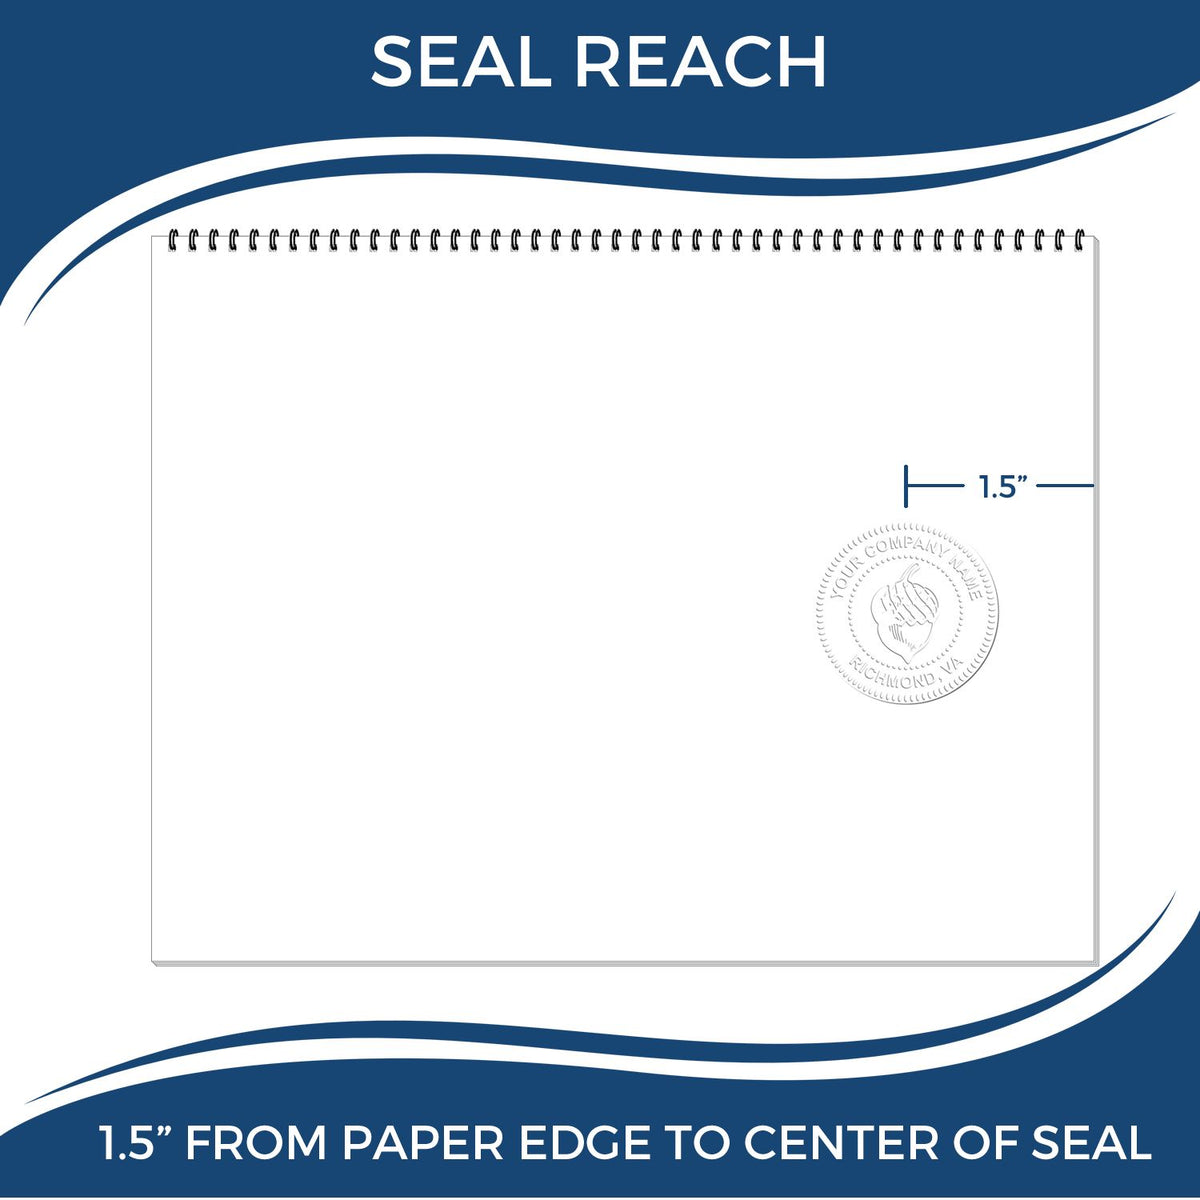 An infographic showing the seal reach which is represented by a ruler and a miniature seal image of the Hybrid Idaho Landscape Architect Seal